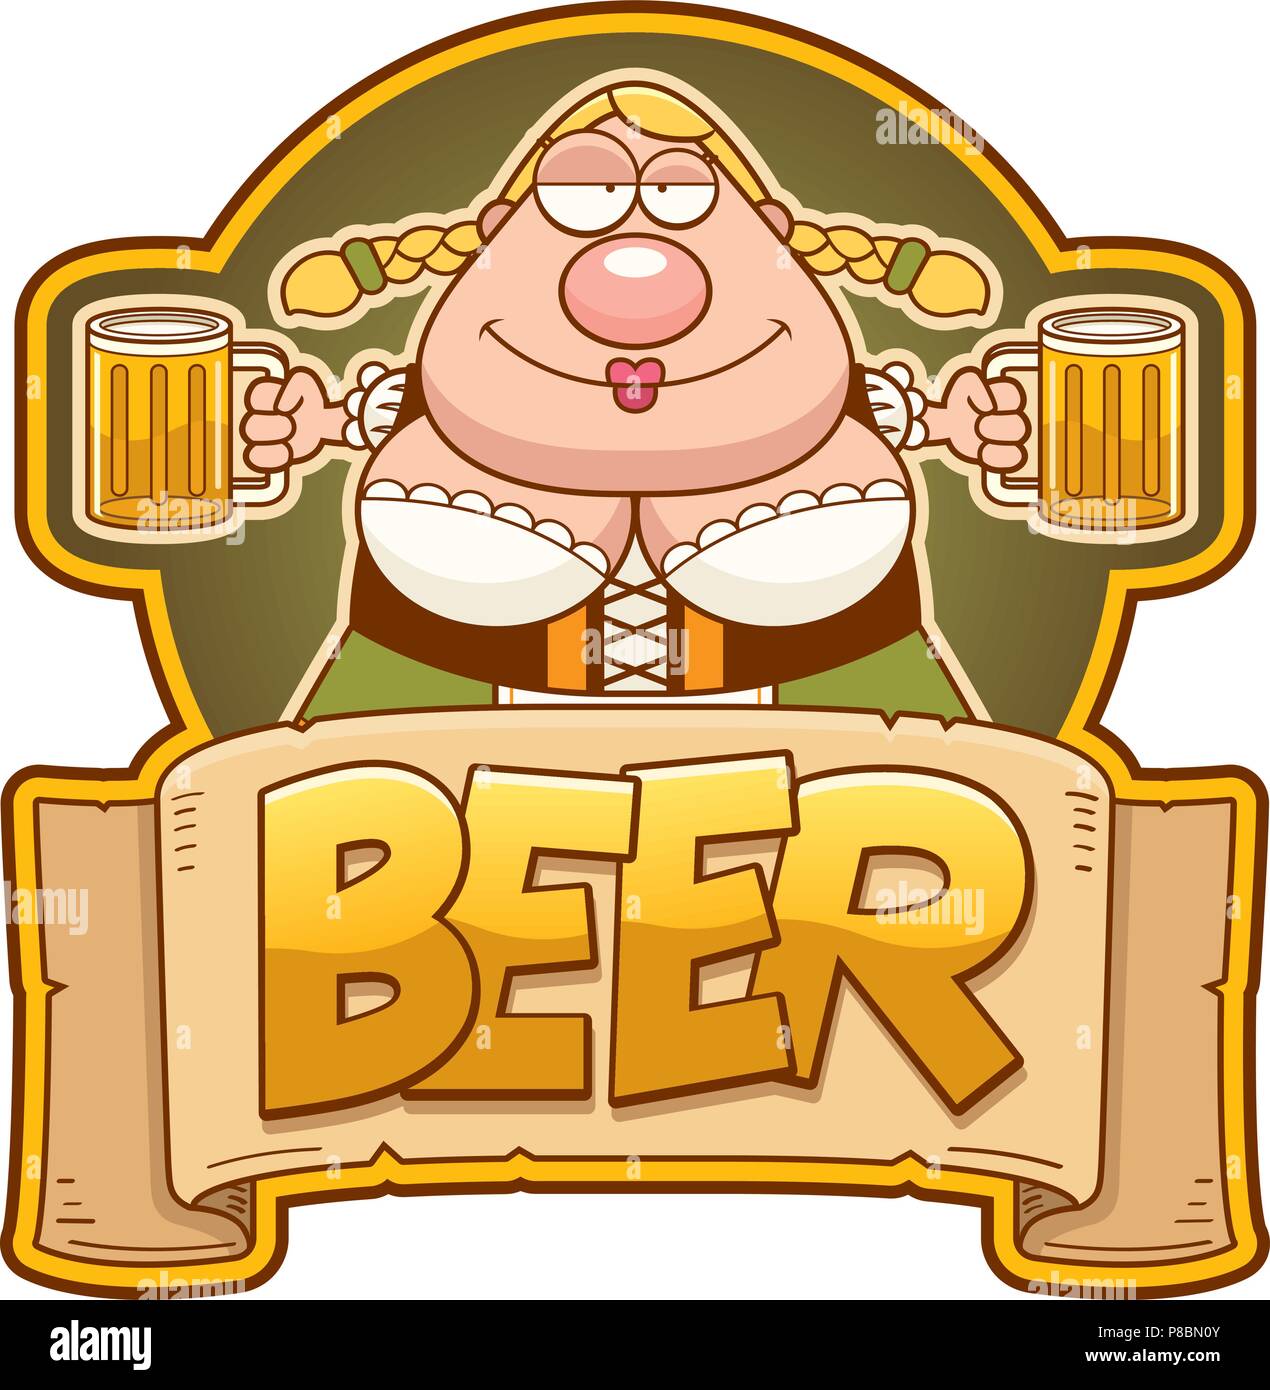 A cartoon illustration of a Oktoberfest woman with two mugs of beer. Stock Vector